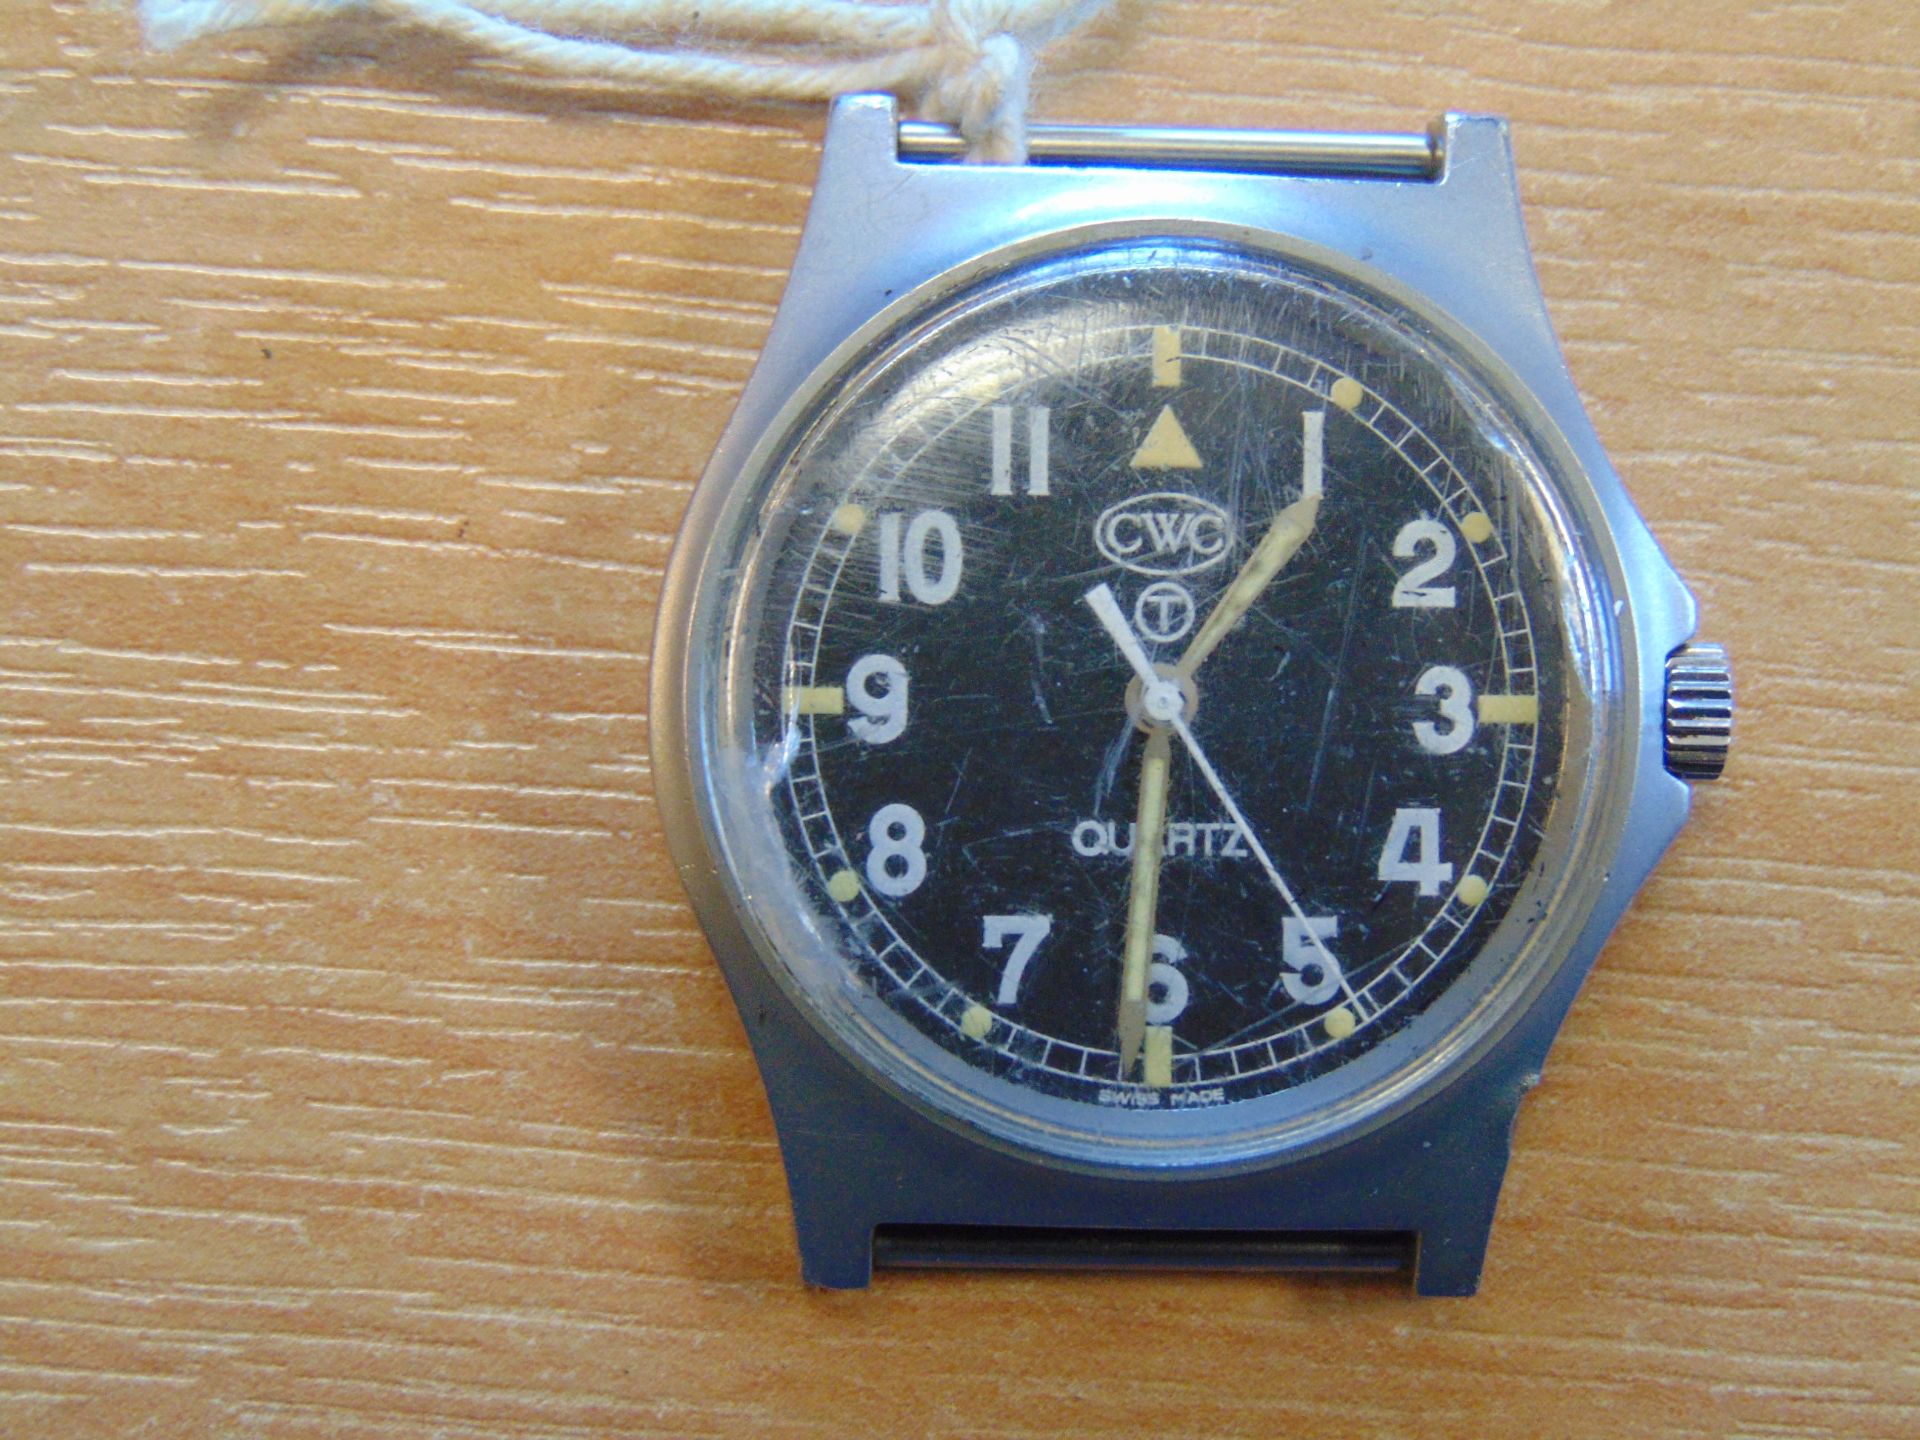 CWC W10 BRITISH ARMY ISSUE SERVICE WATCH NATO MARKS DATE 1998 - Image 3 of 5